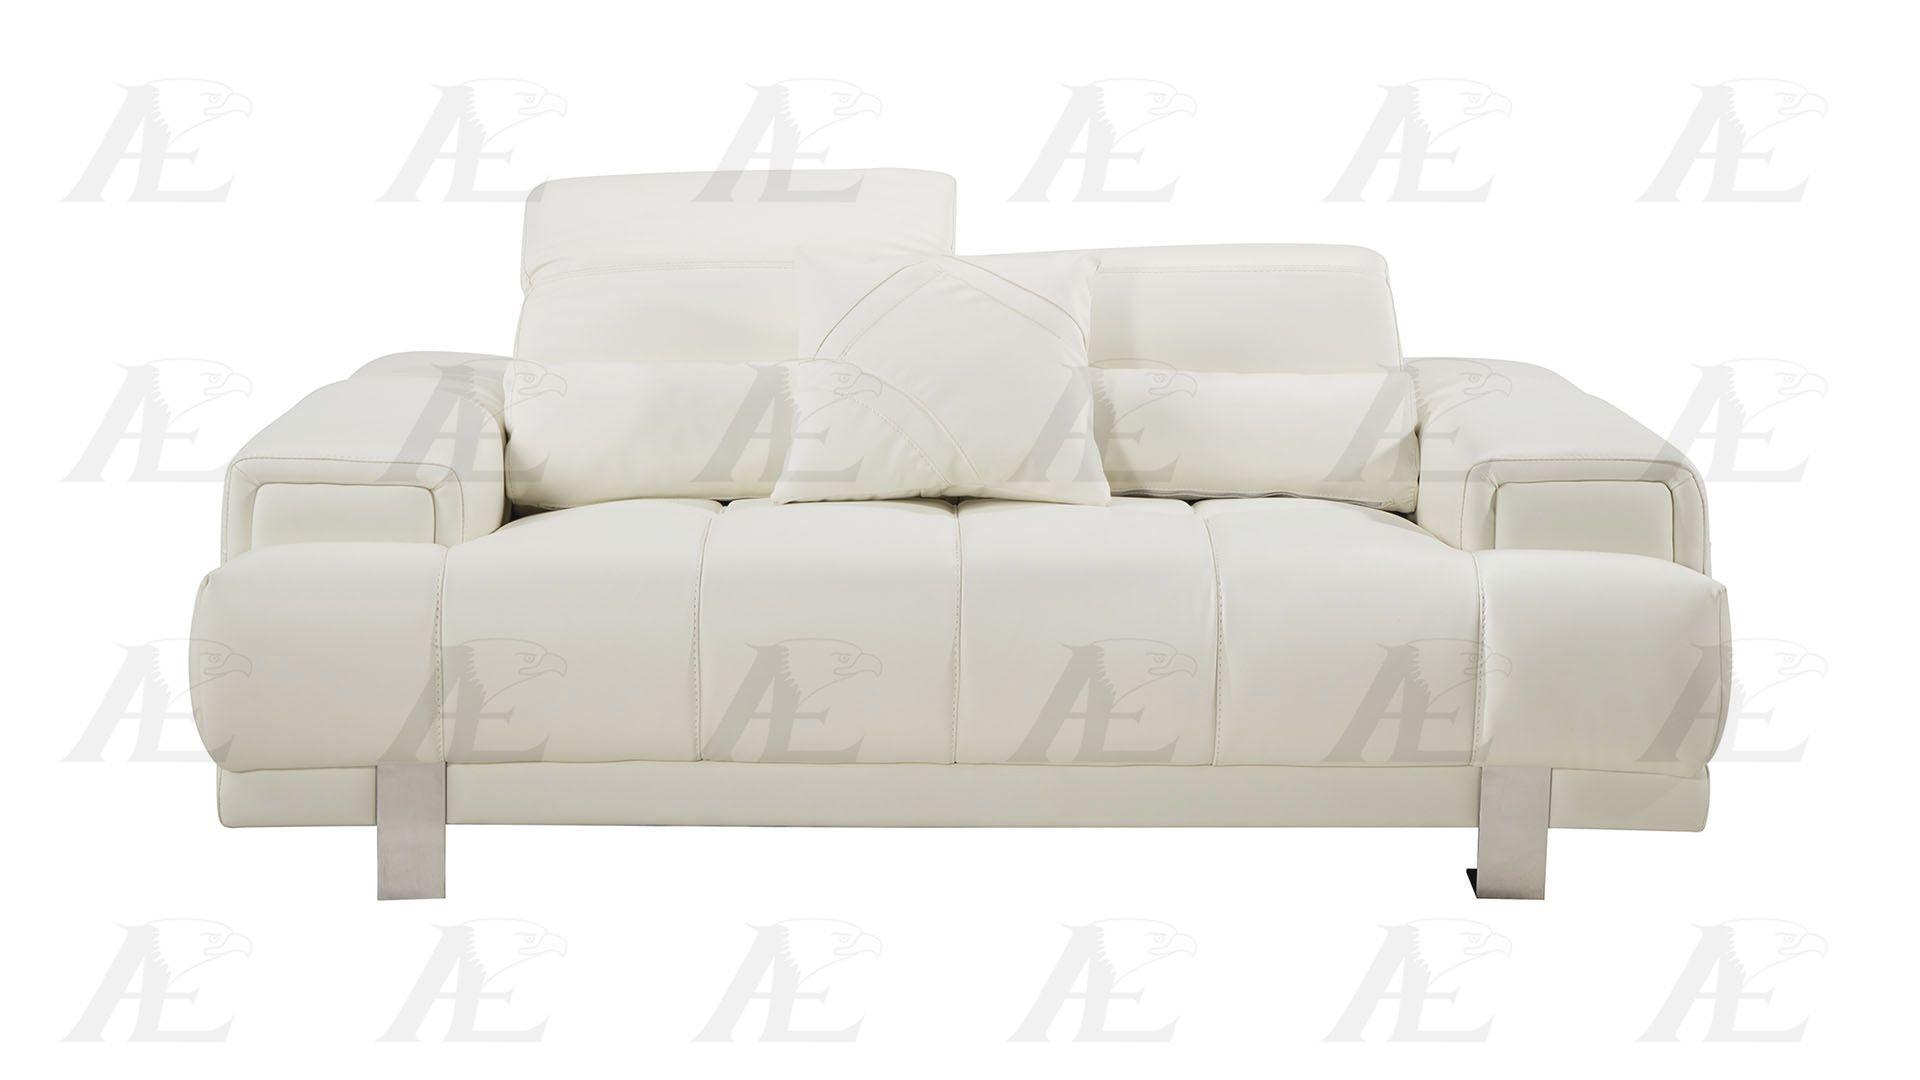 

                    
American Eagle Furniture AE606-IV Sofa and Loveseat Set Ivory Bonded Leather Purchase 
